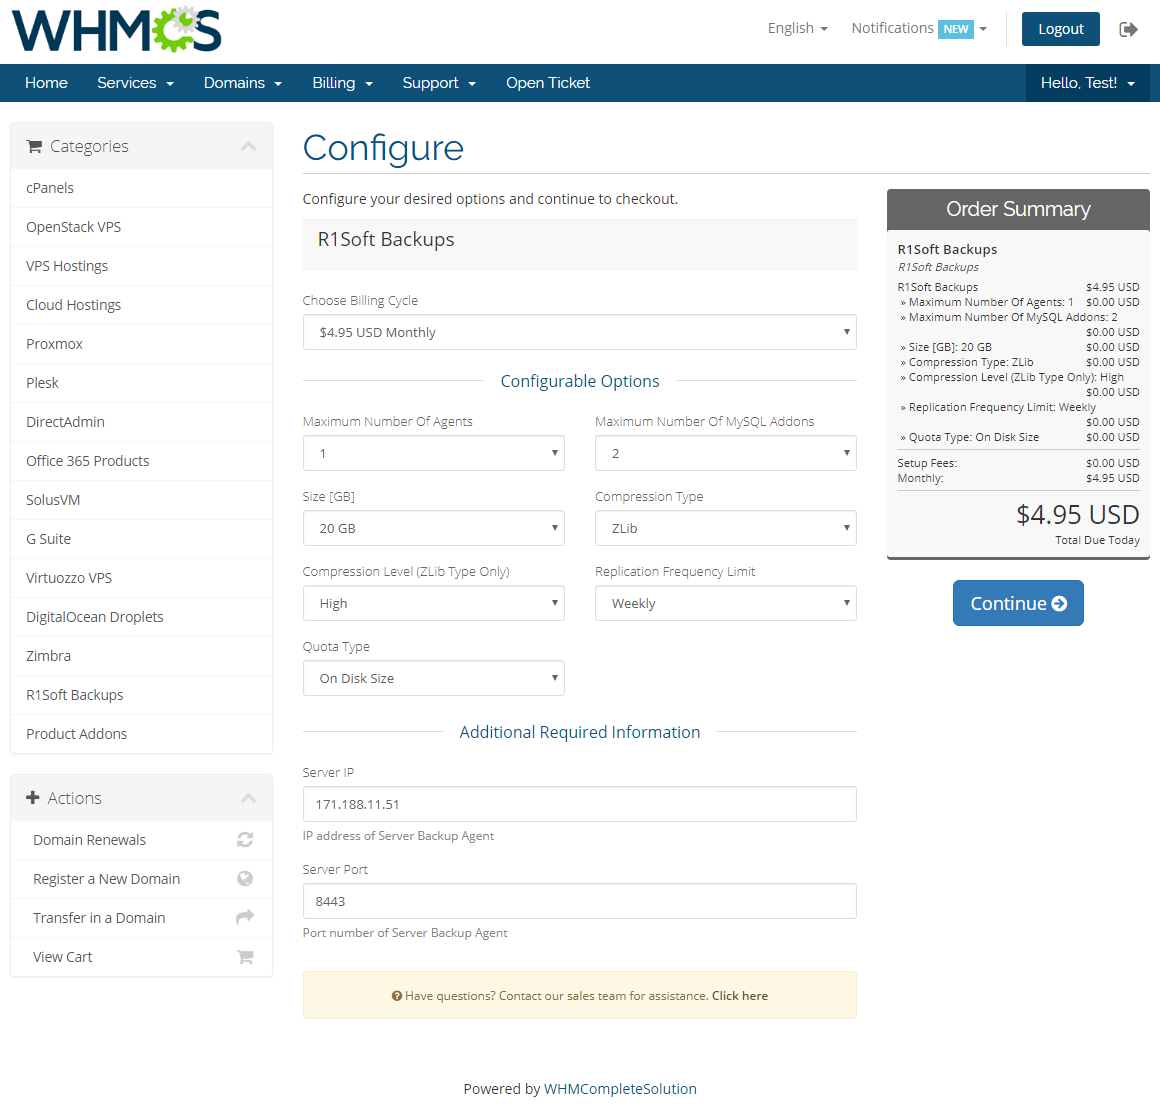 R1Soft Backups For WHMCS: Screen 3